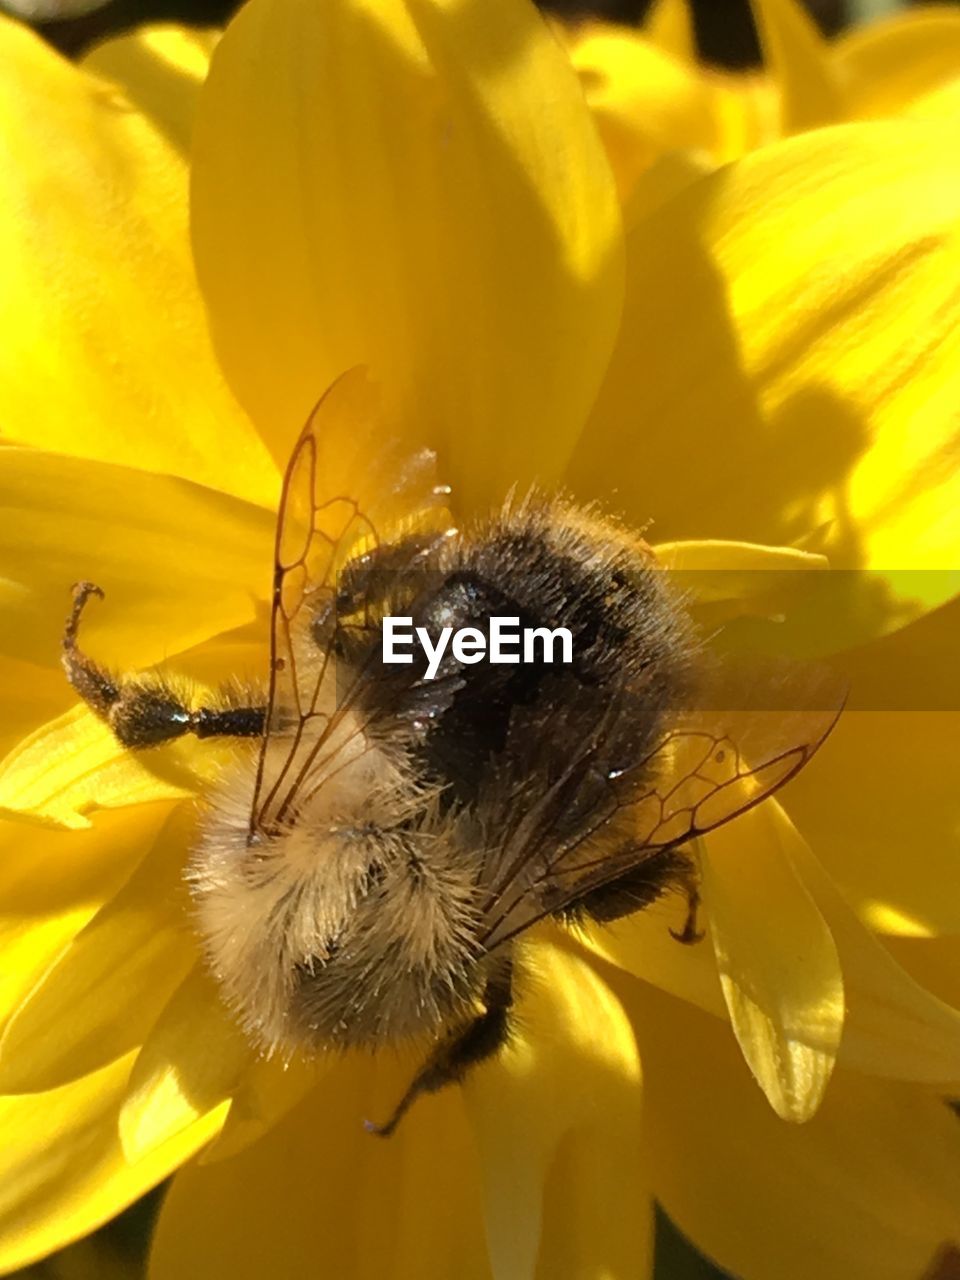 CLOSE-UP OF BEE POLLINATING FLOWER